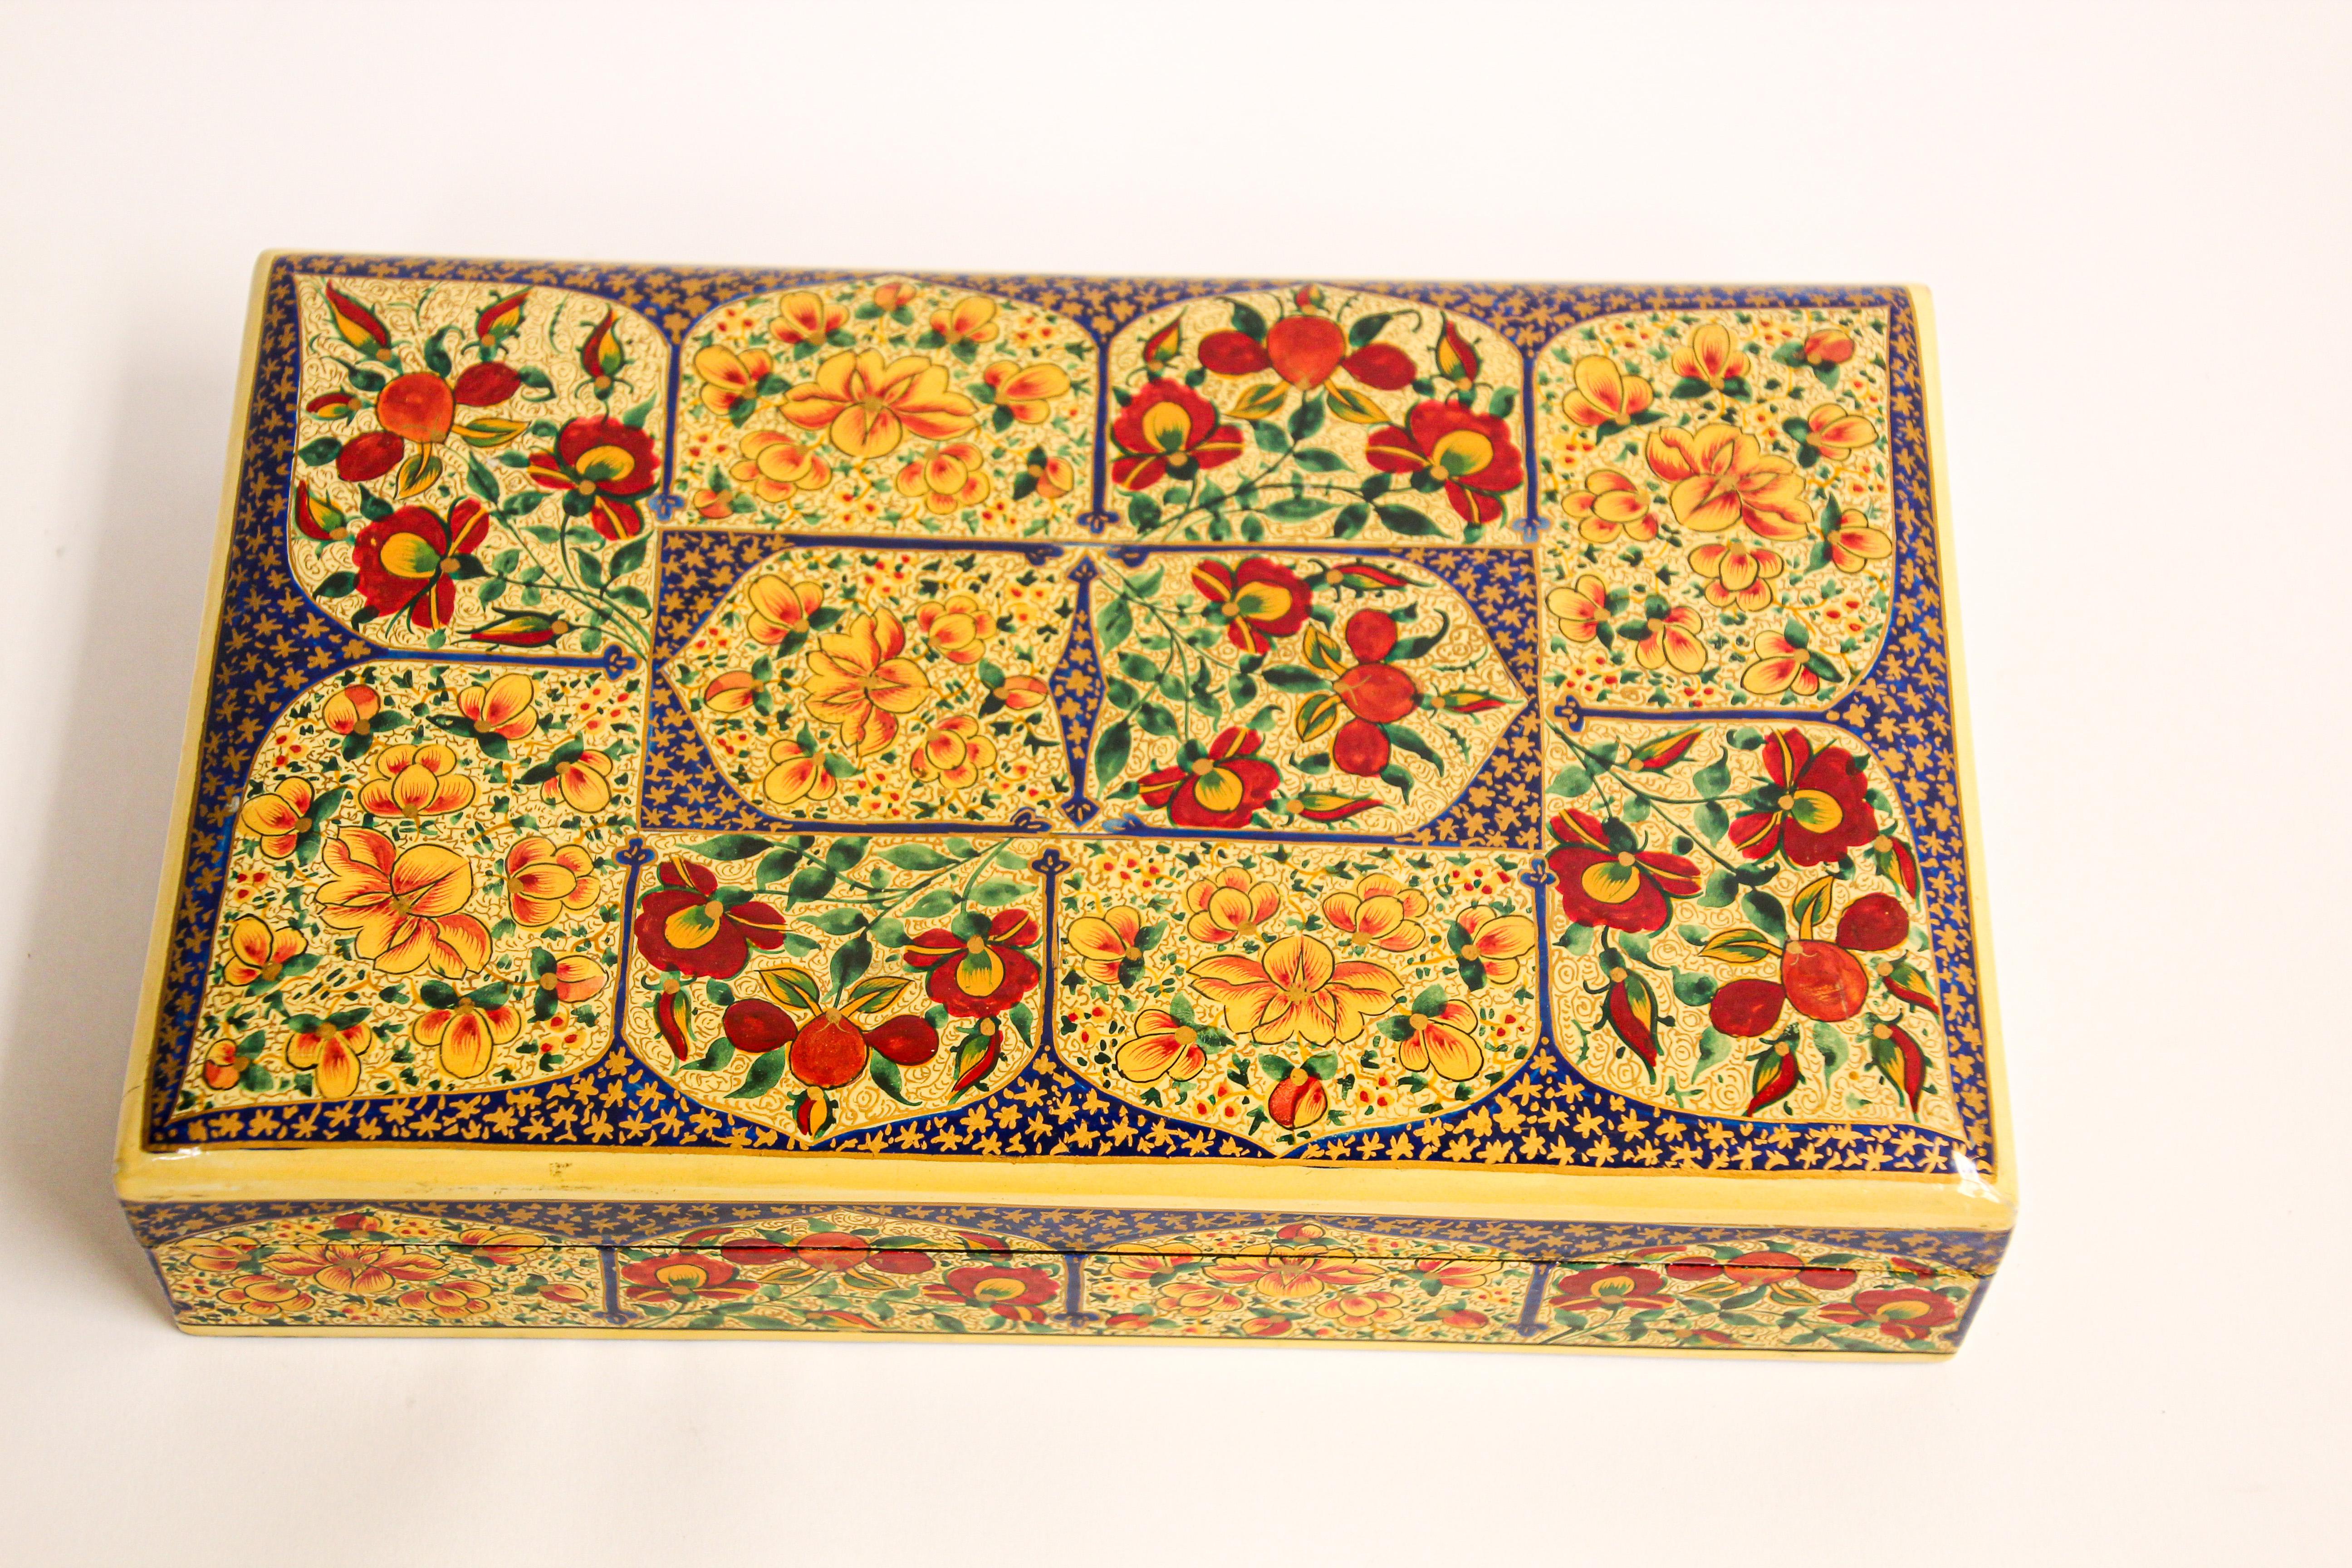 20th Century Hand Painted Rajasthani Lacquer Decorative Box For Sale